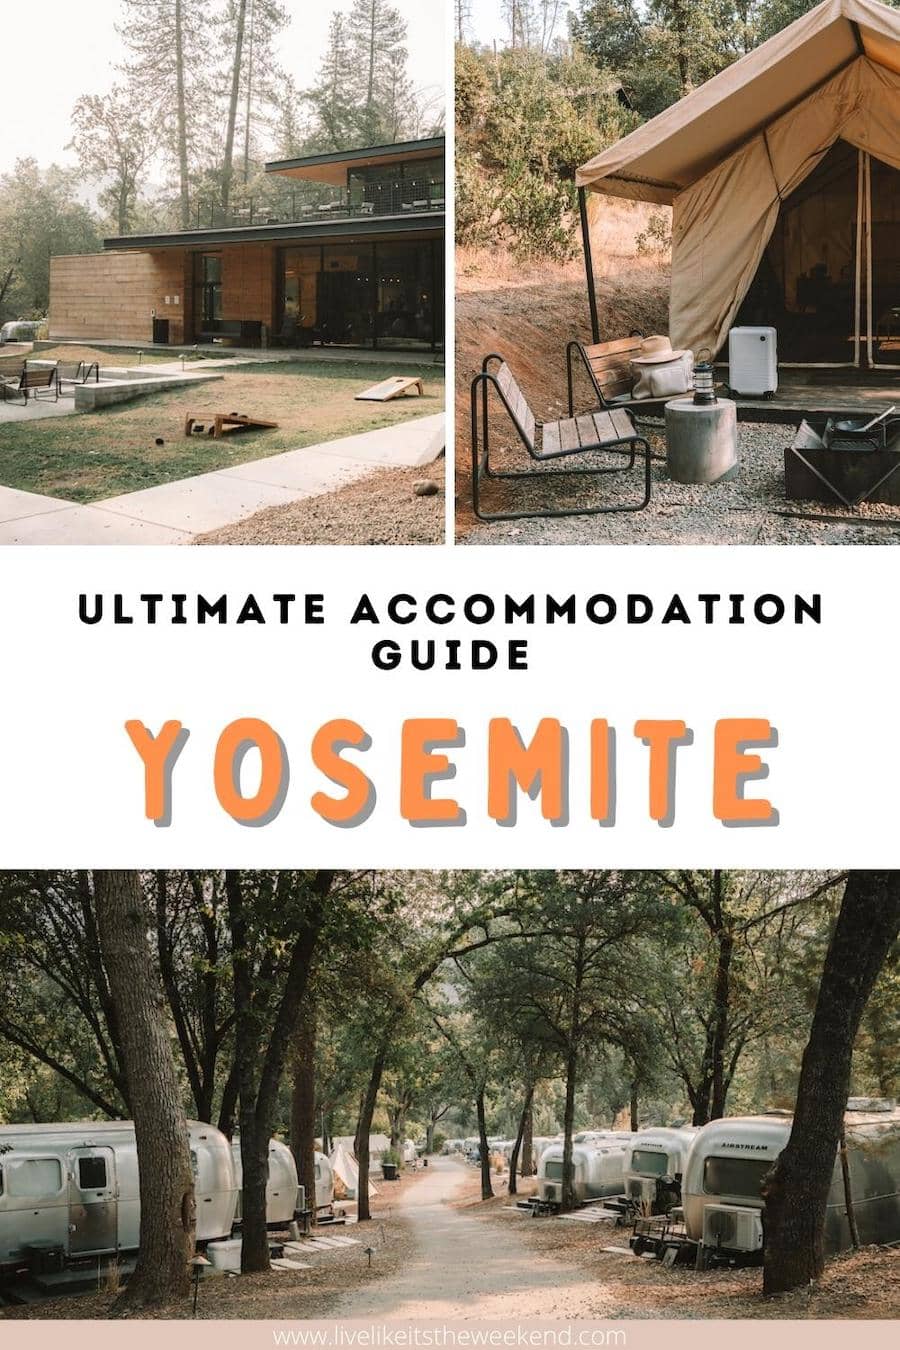 where to stay in yosemite national park